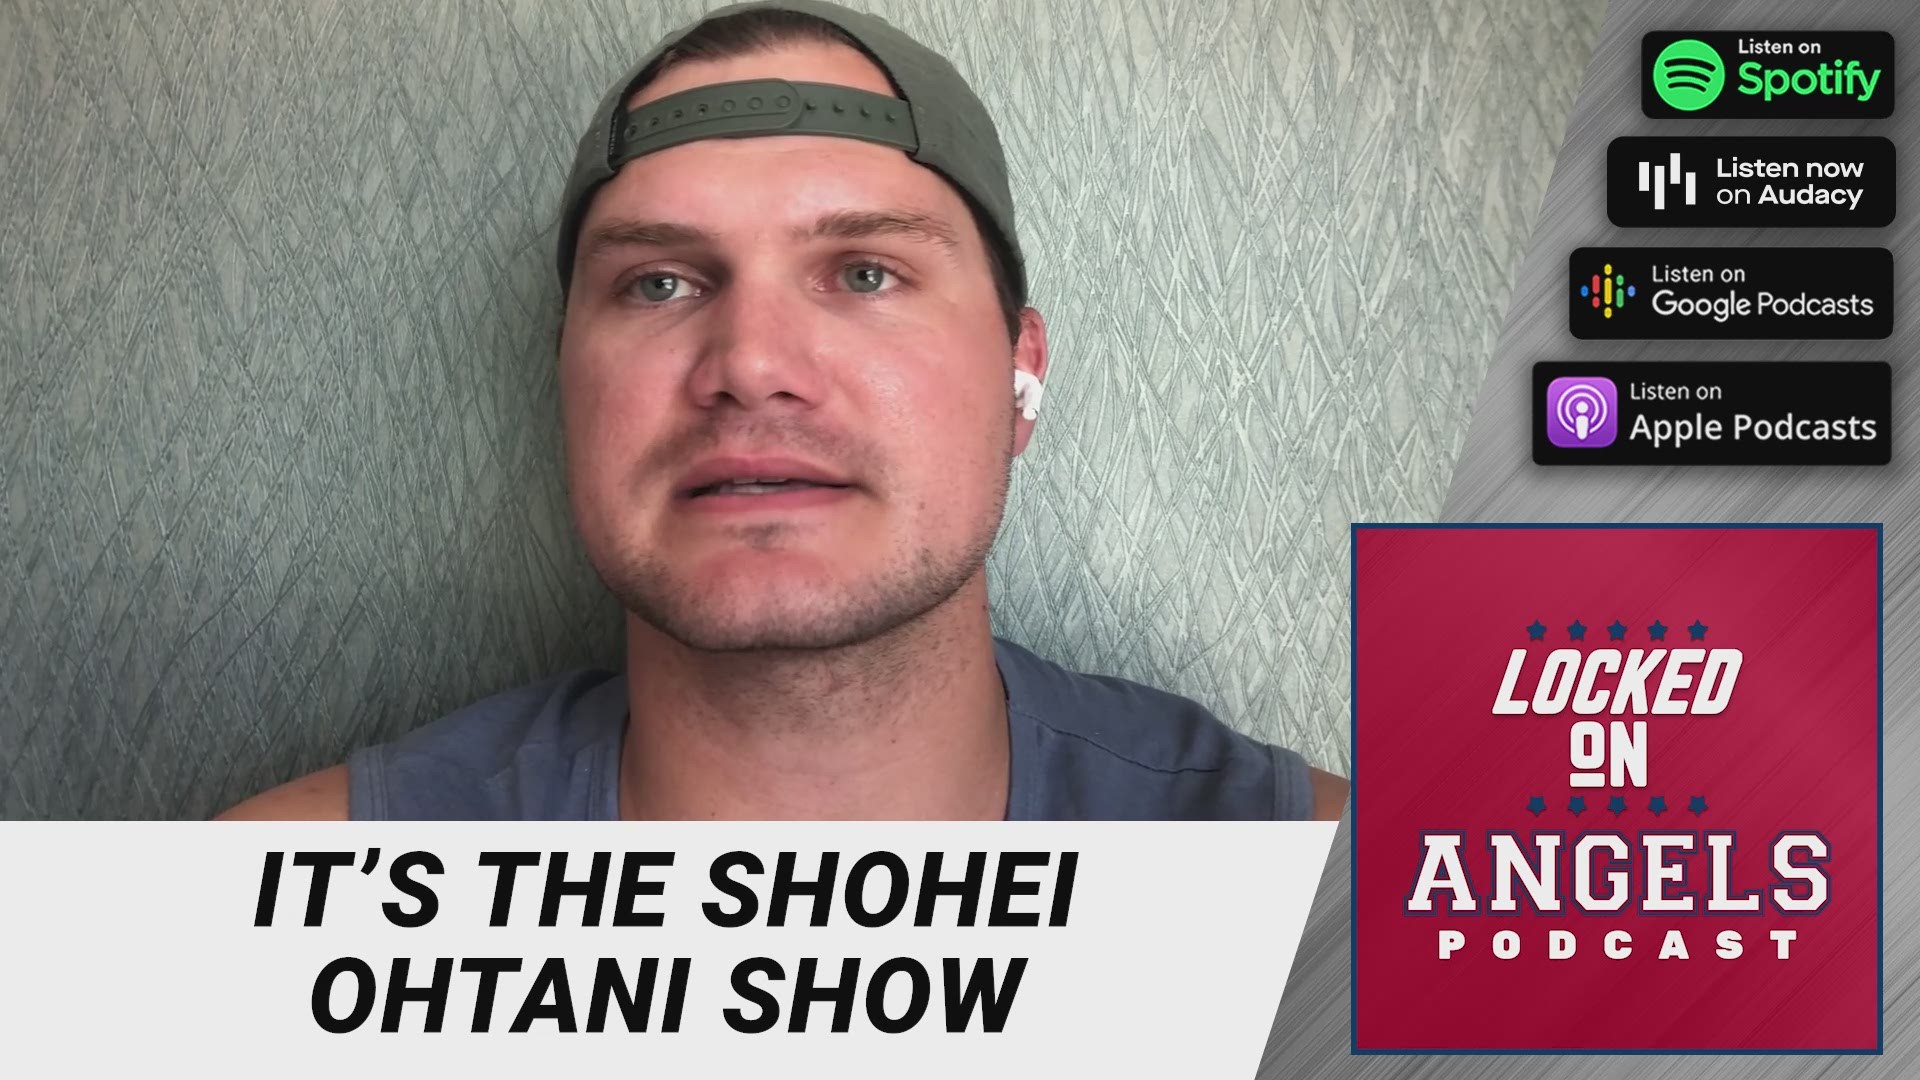 Locked On Angels host Brent Maguire gives some thoughts on Shohei Ohtani shortly before he becomes the center of the baseball world for the next 24 hours.